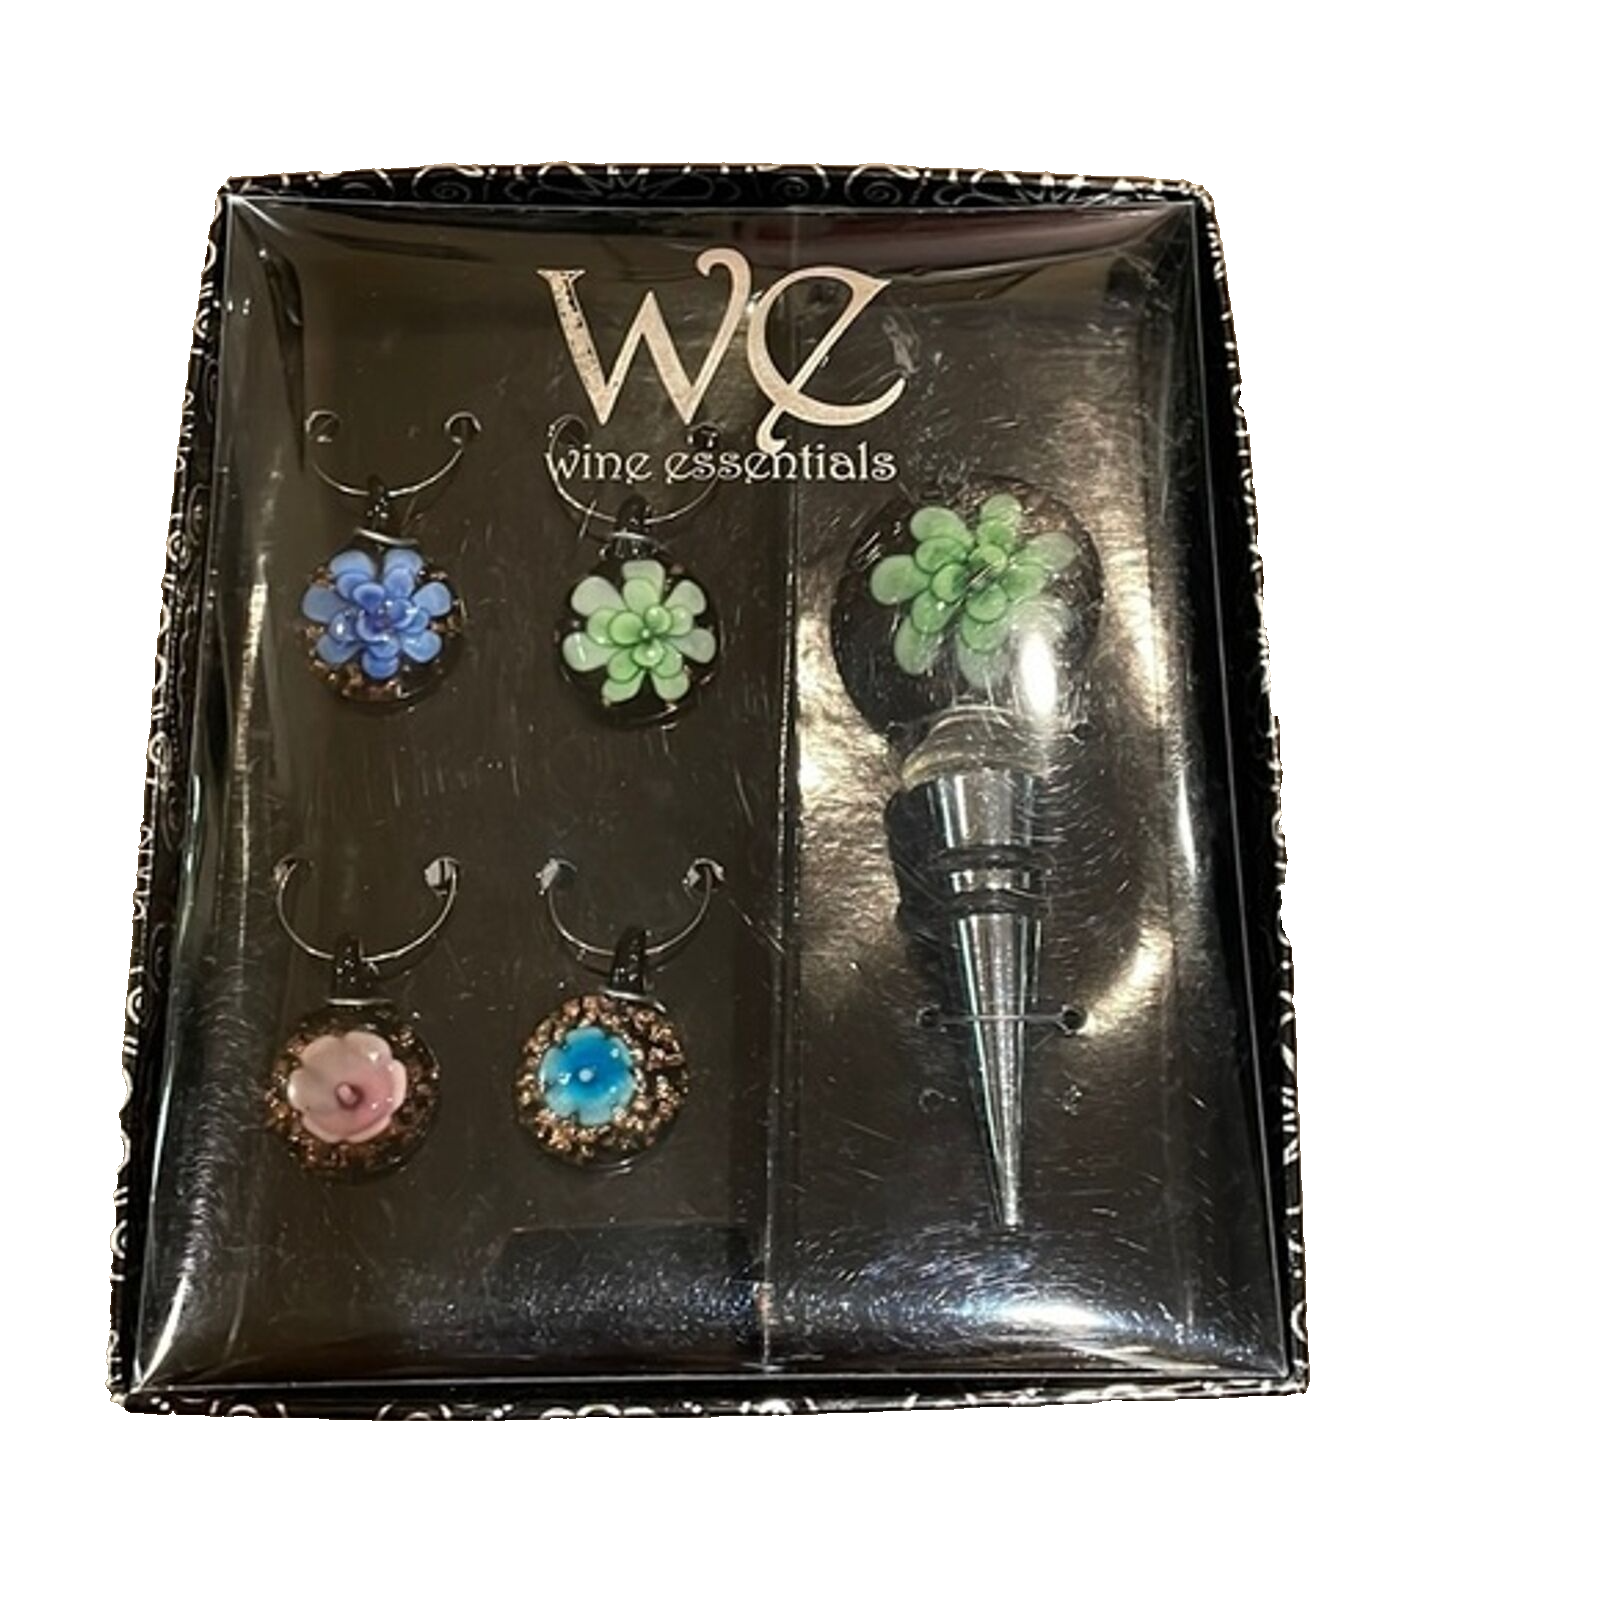 Home Essentials Art Glass Wine Stopper 4 Floral Charms NWOT - $10.00